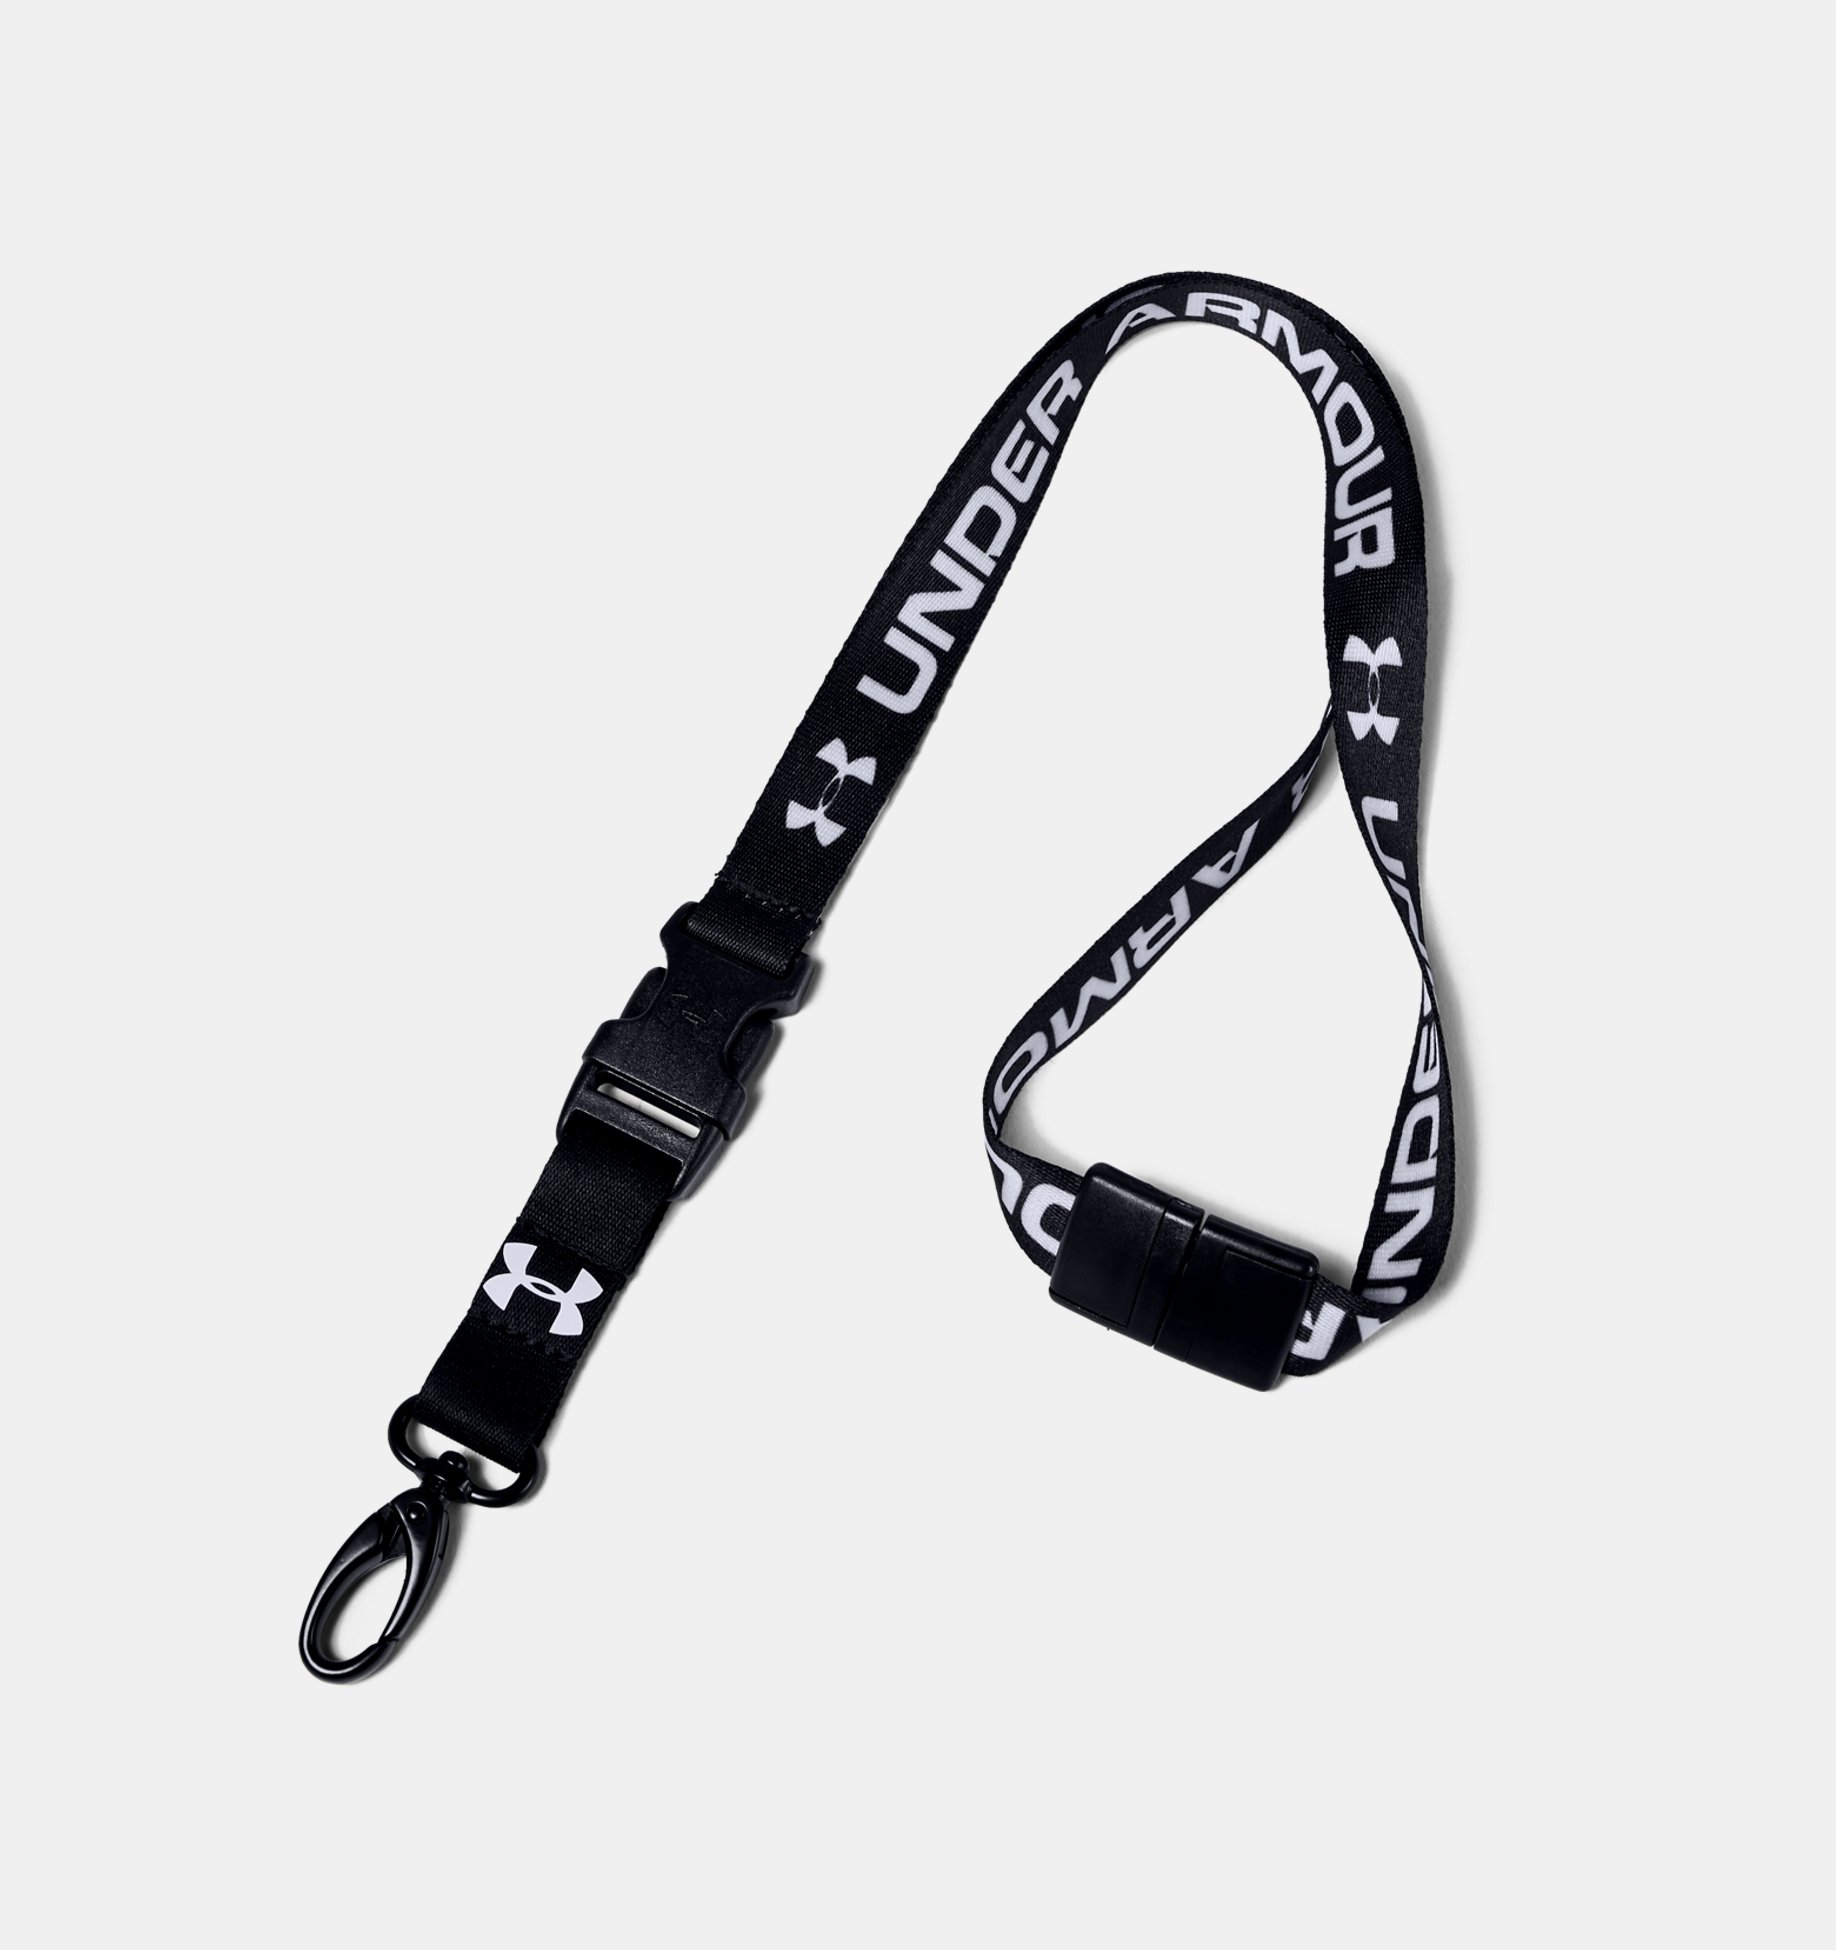 Under Armour Lanyard Inspired Strap Badge ID Holder Detachable Keychain 